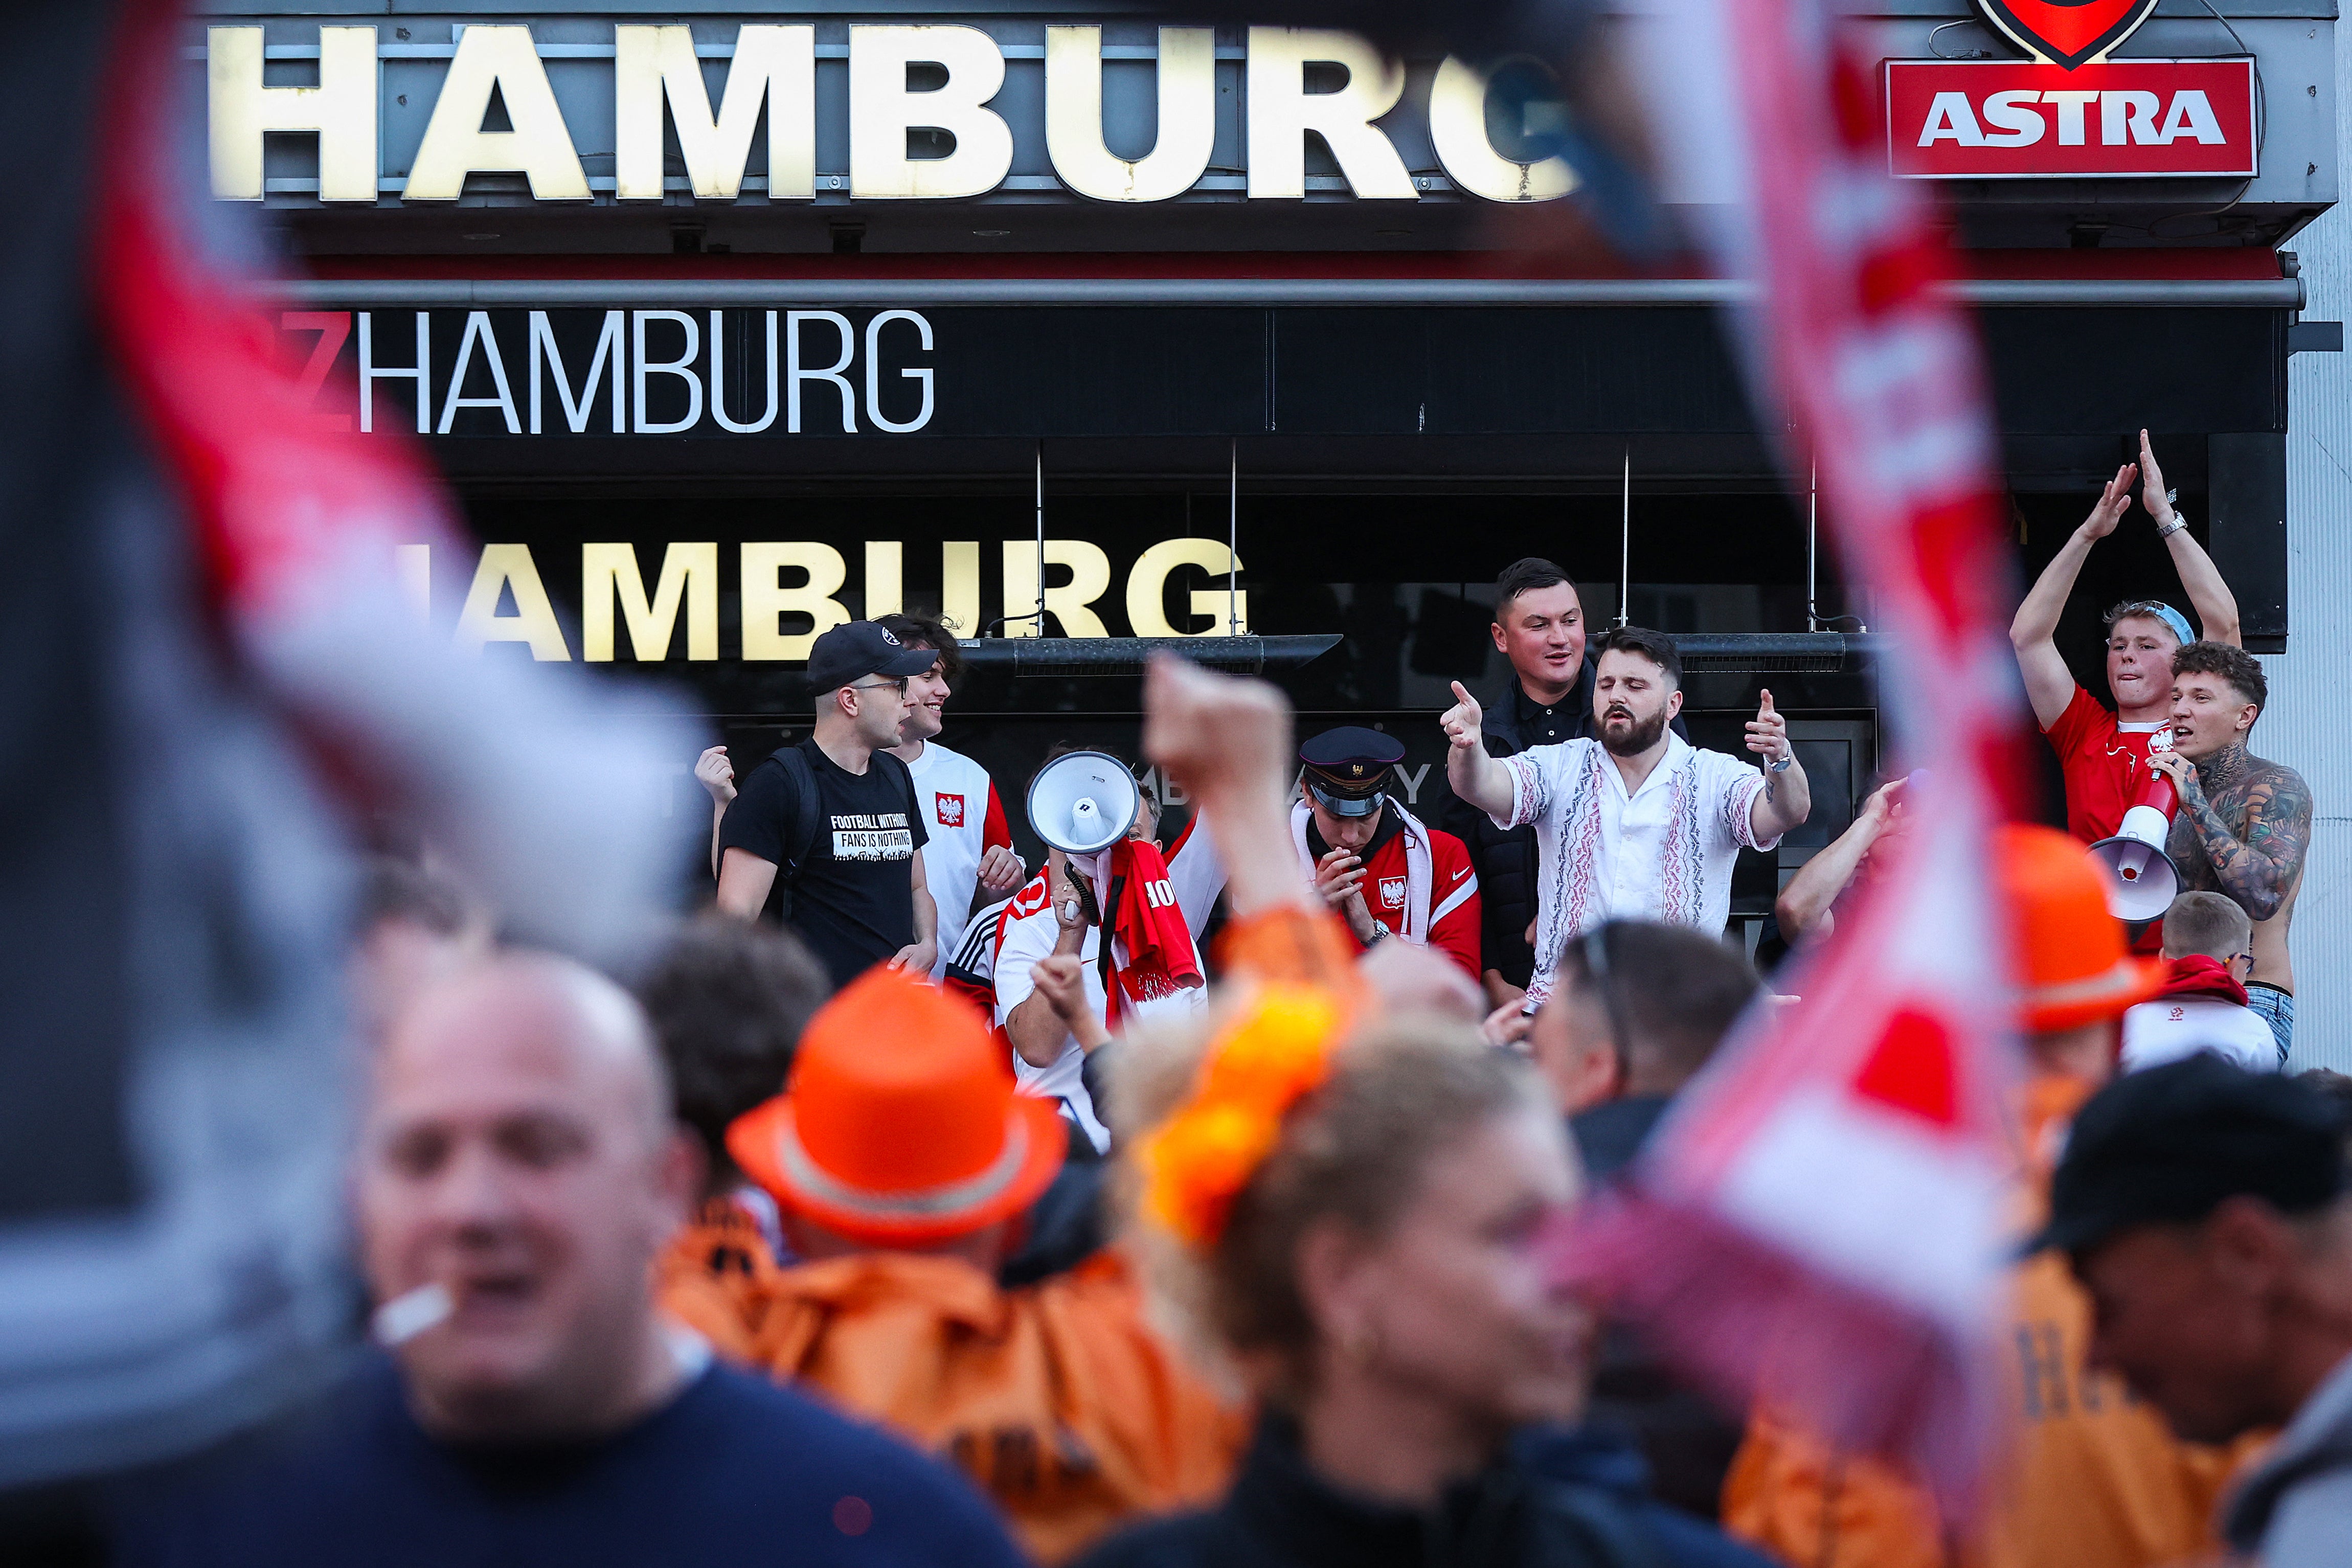 Thousands of Dutch and Polish fans have descended on Hamburg ahead of their 2pm game